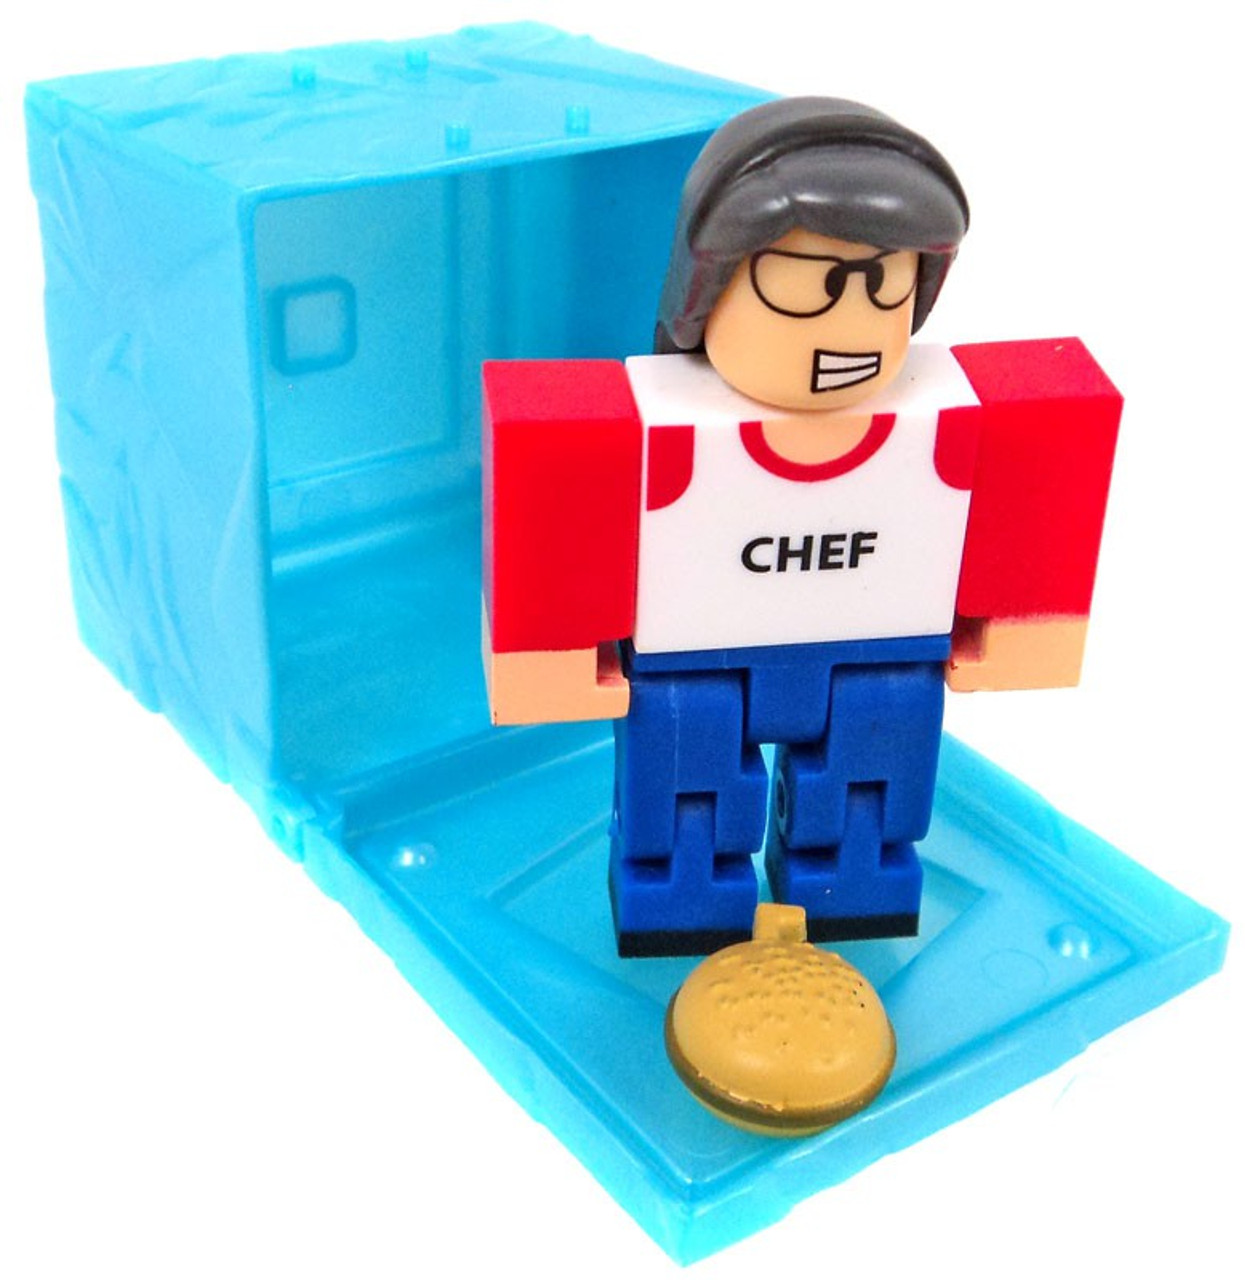 Roblox Red Series 3 High School Life Lunch Lady 3 Mini Figure Blue Cube With Online Code Loose Jazwares Toywiz - roblox high school roblox jazwares